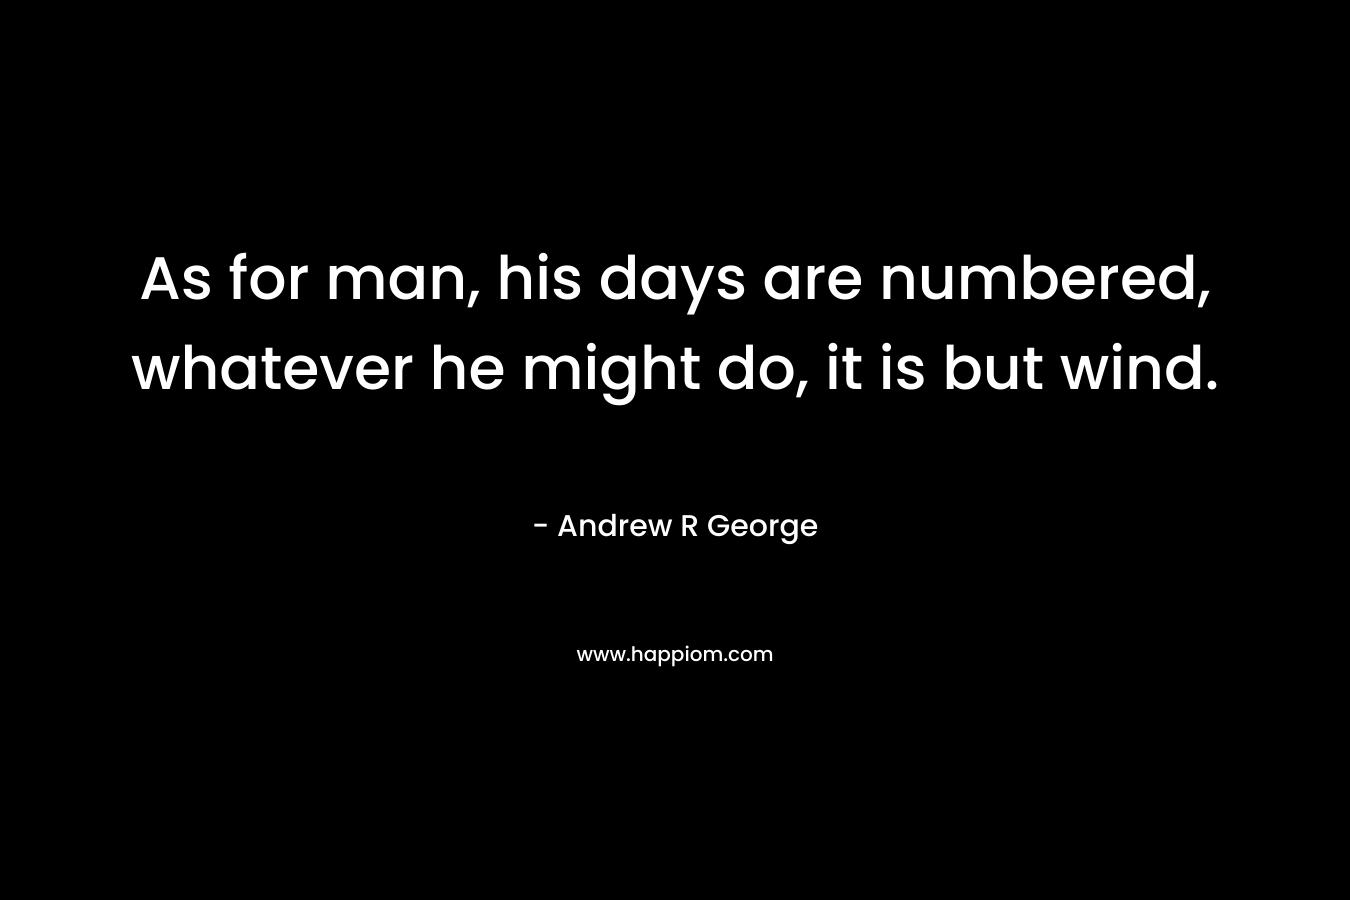 As for man, his days are numbered, whatever he might do, it is but wind. – Andrew R George